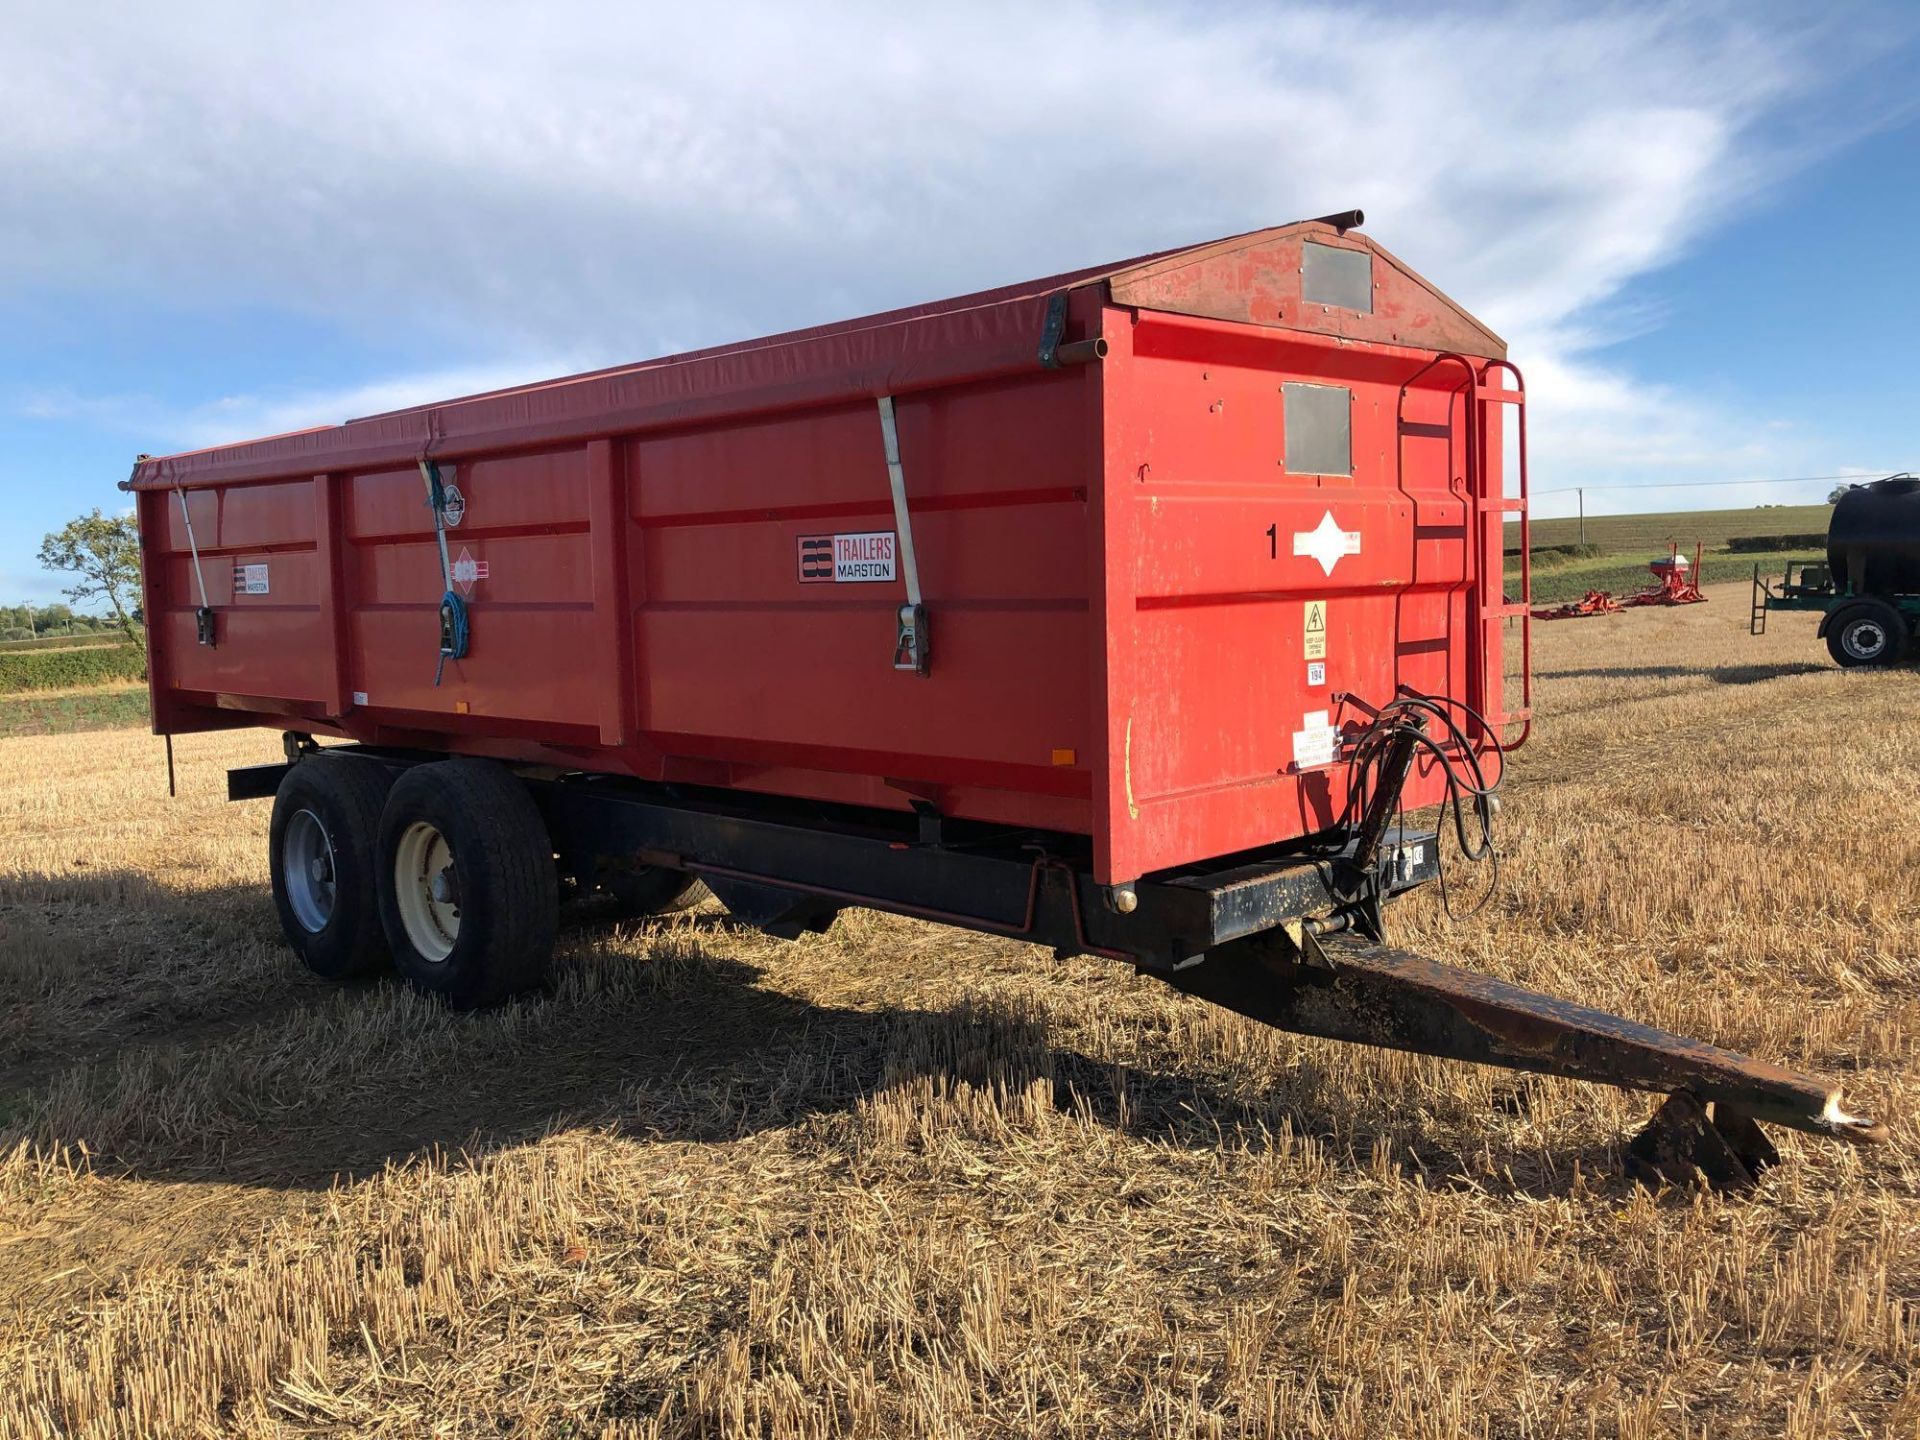 1995 AS Marston ACE FF14T twin axle grain trailer with sprung drawbar, manual tailgate and grain chu - Image 2 of 7